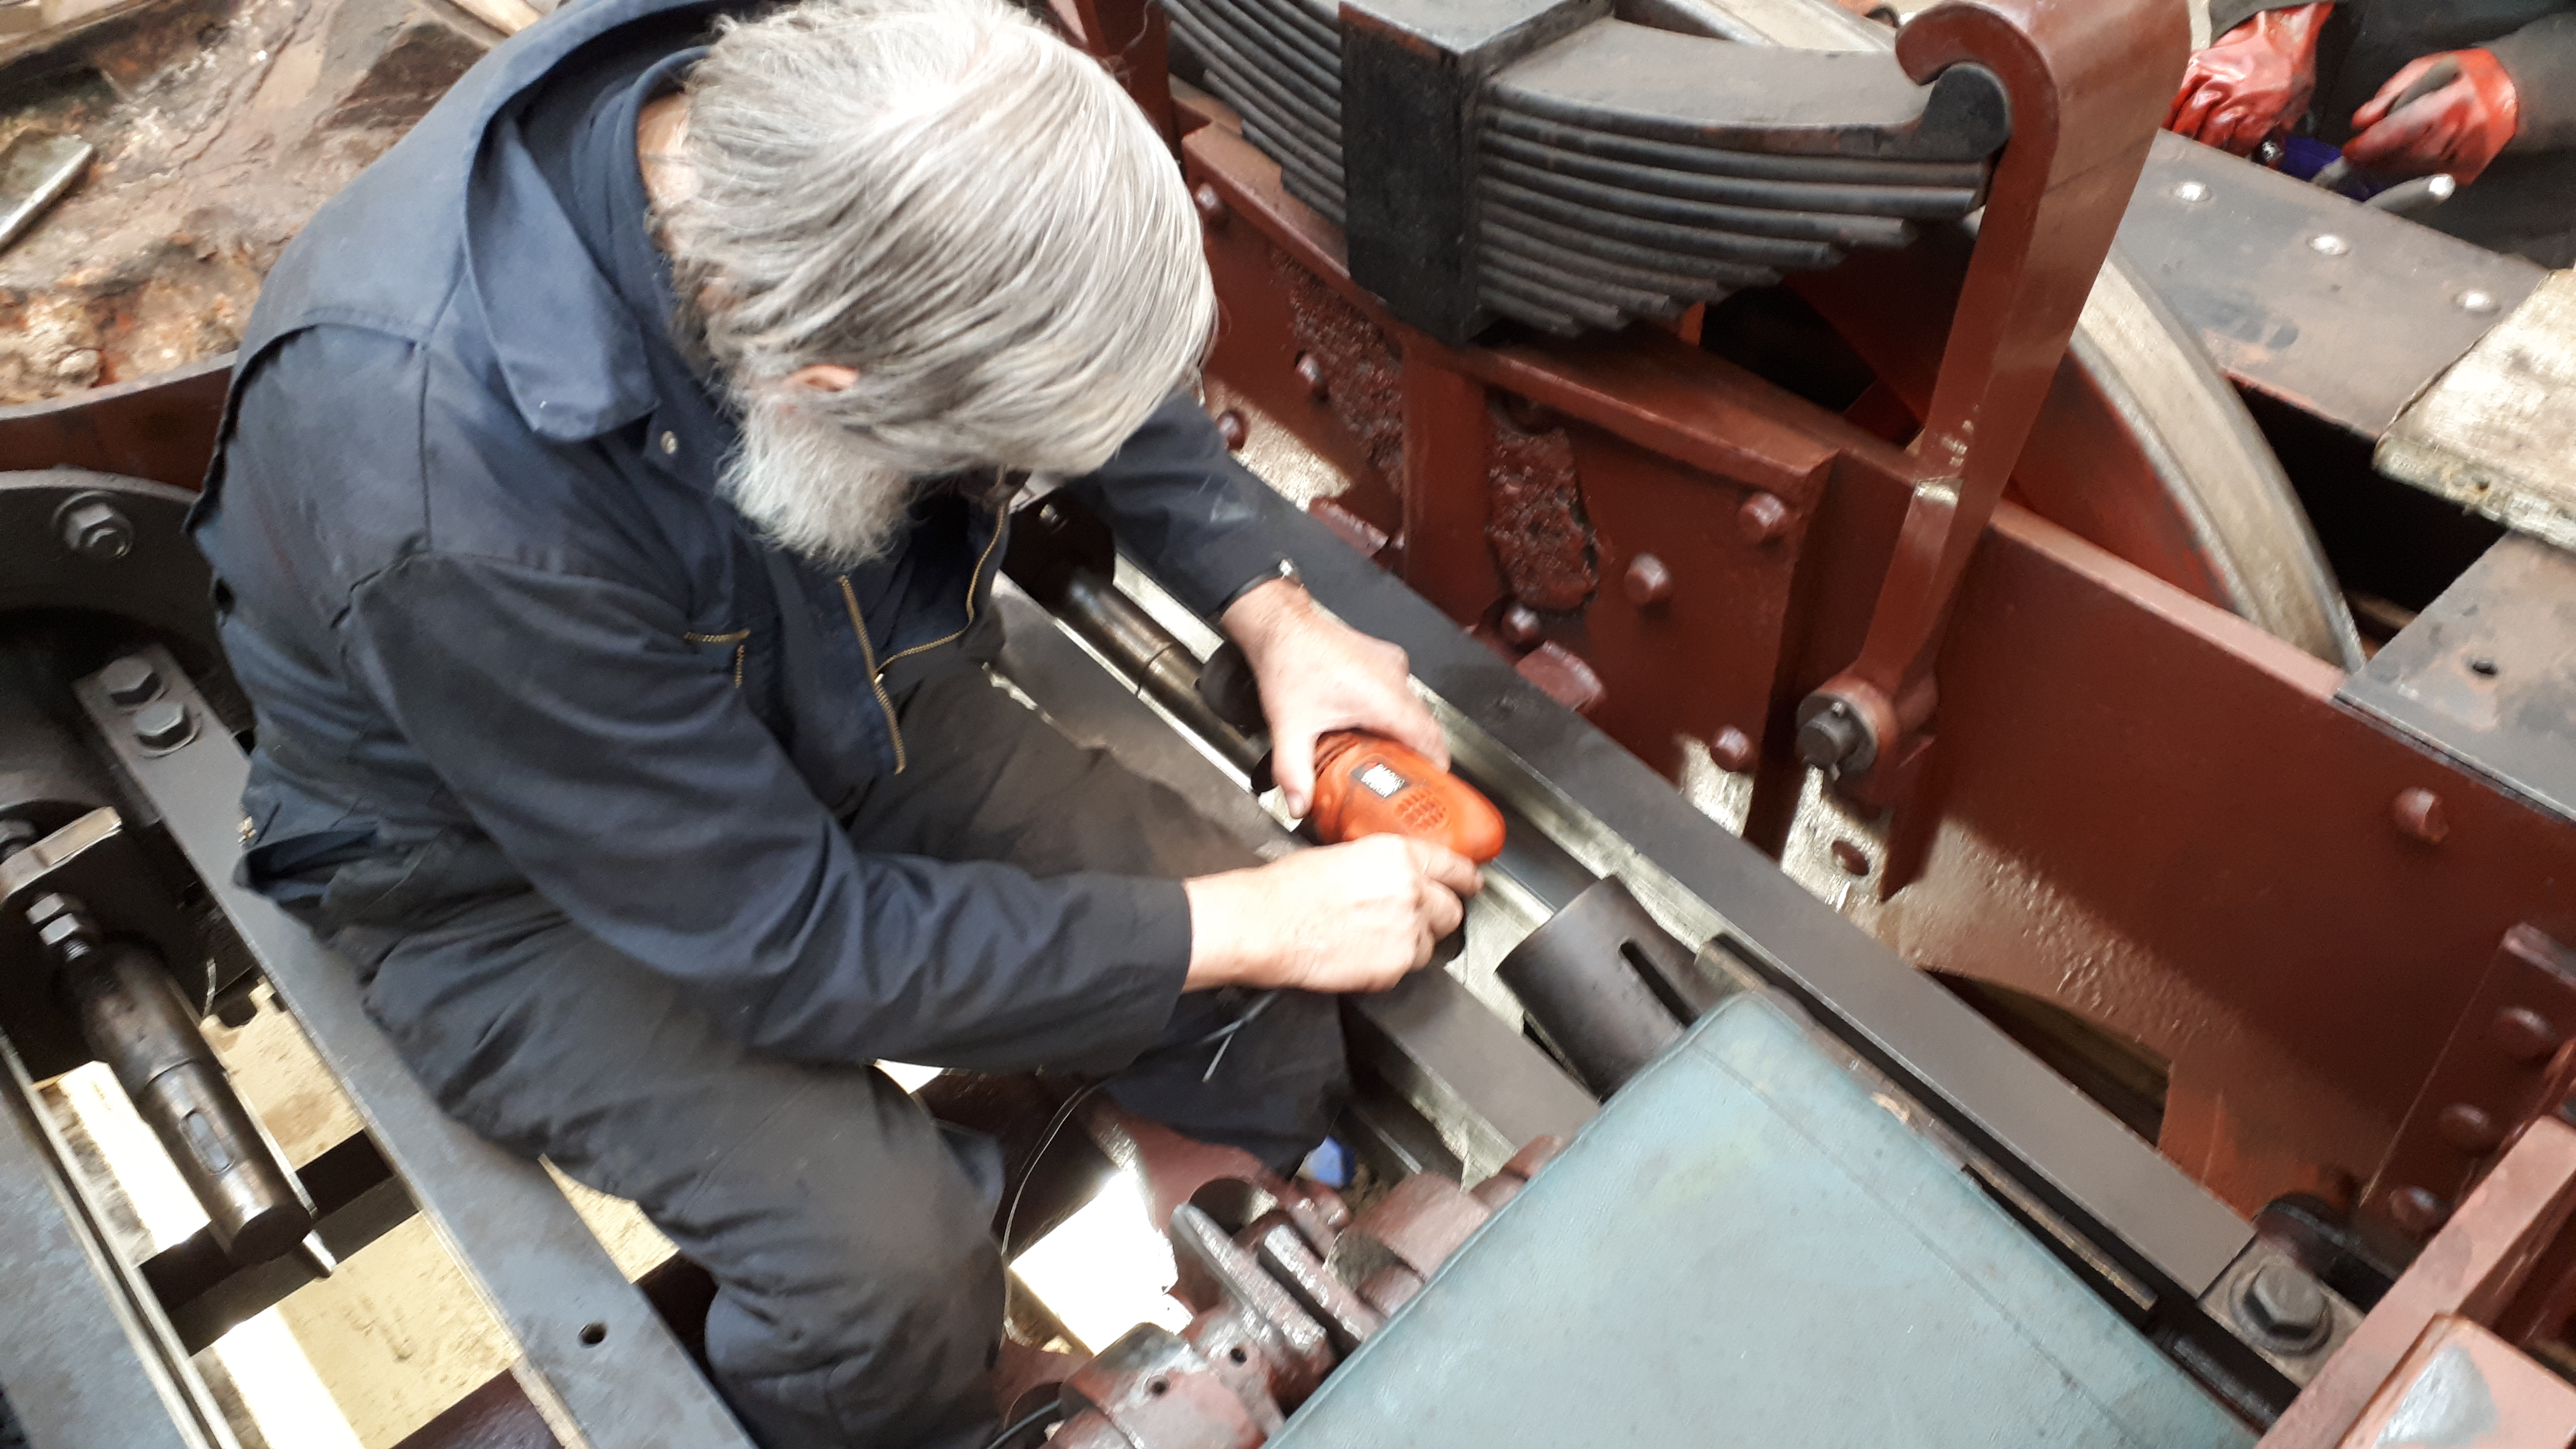 Alan removes a burr from FR 20's piston rod